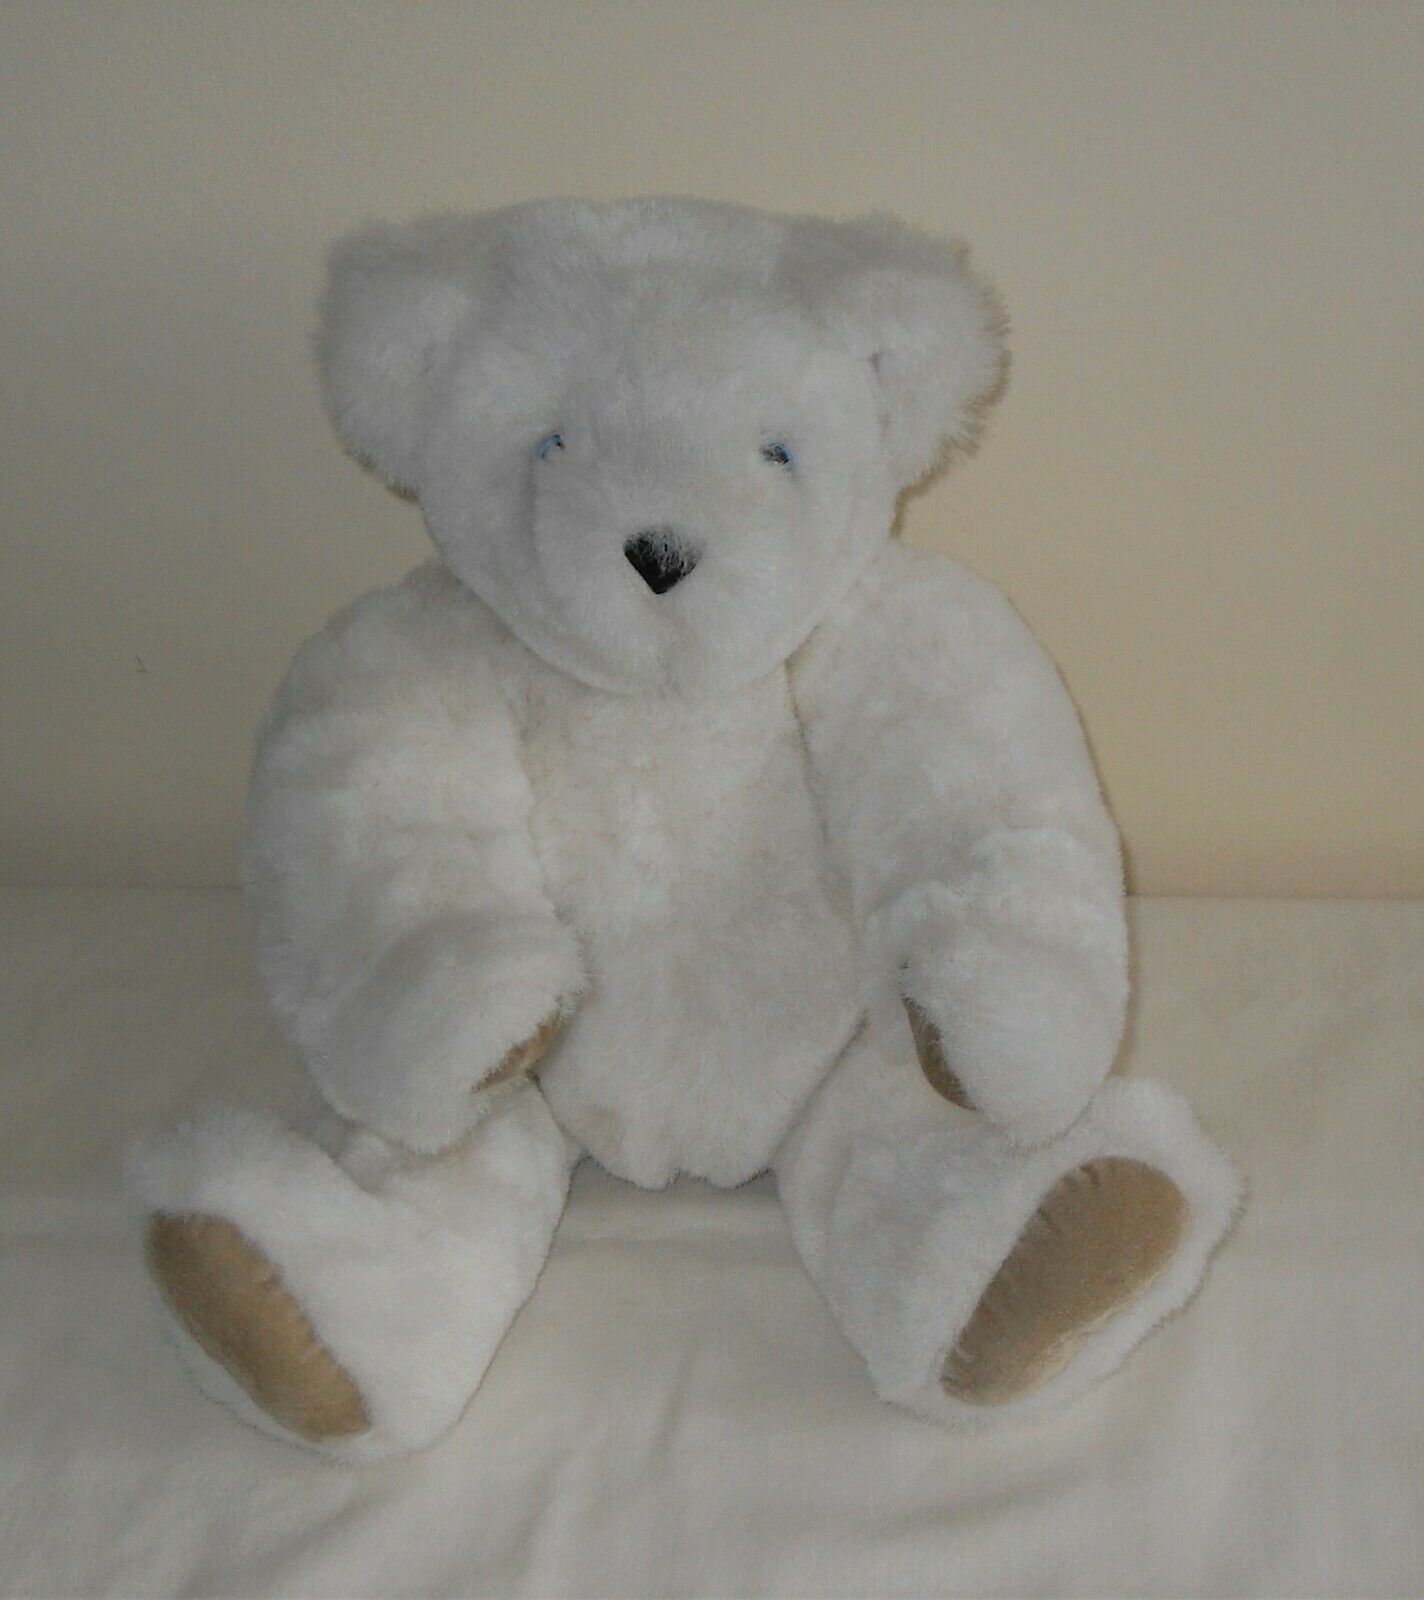 Vermont Teddy Bear 16" White Jointed Arms And Legs